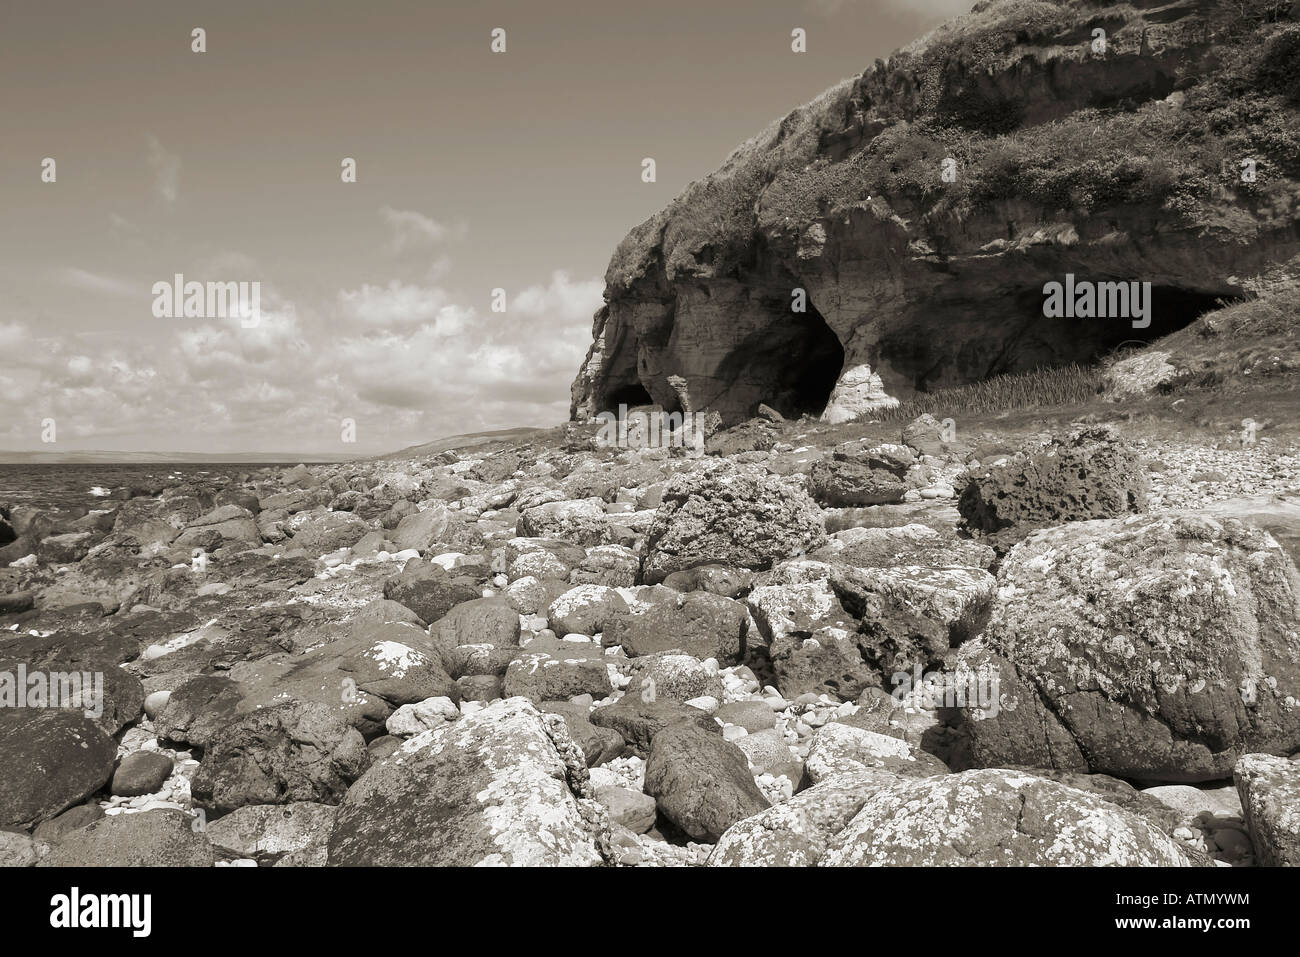 Monochrome Image of the King's Caves, west coast of the Isle of Arran, Scotland. Reputed refuge of Robert The Bruce. Stock Photo